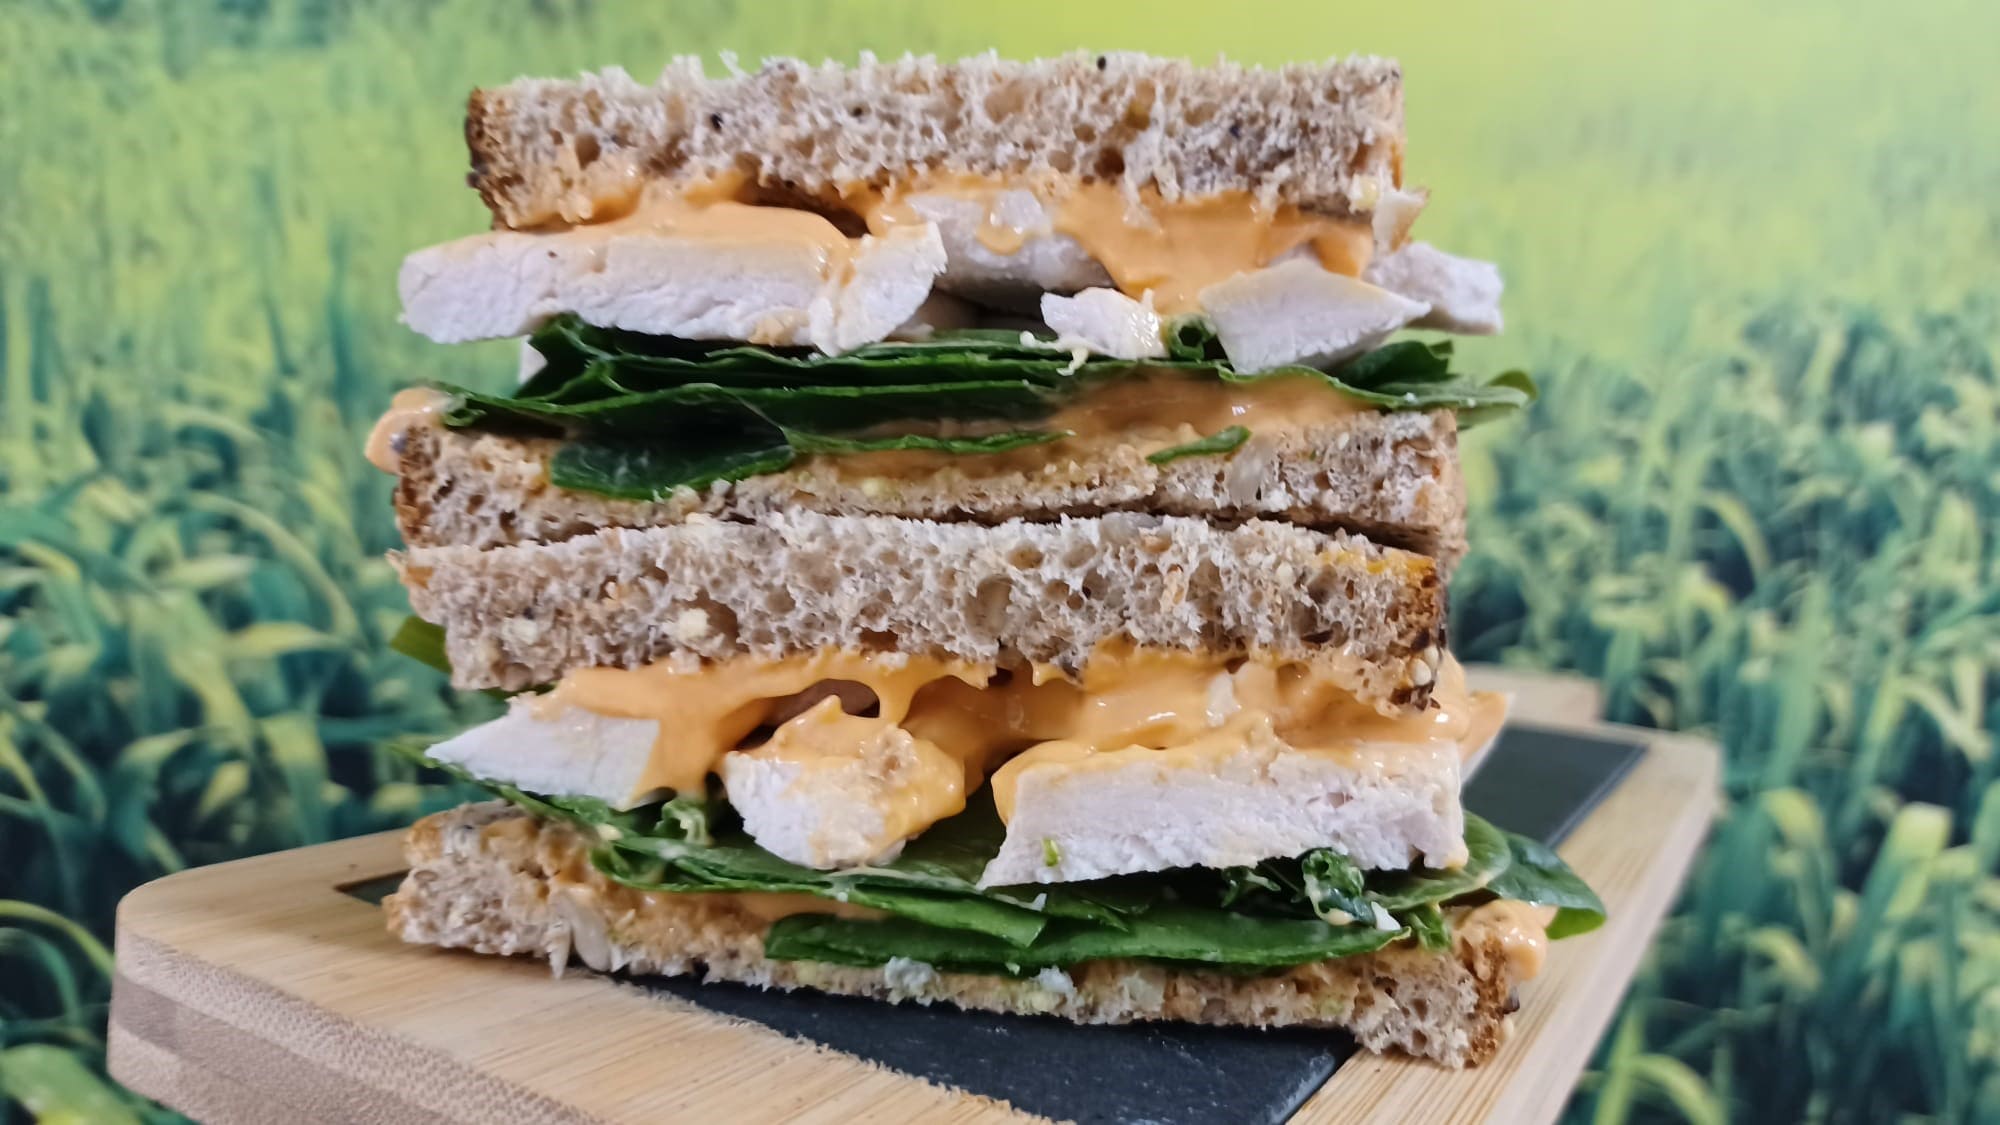 Chicken, Spinach and Hellmann's Taco Sauce Sandwich on Seeded Cob